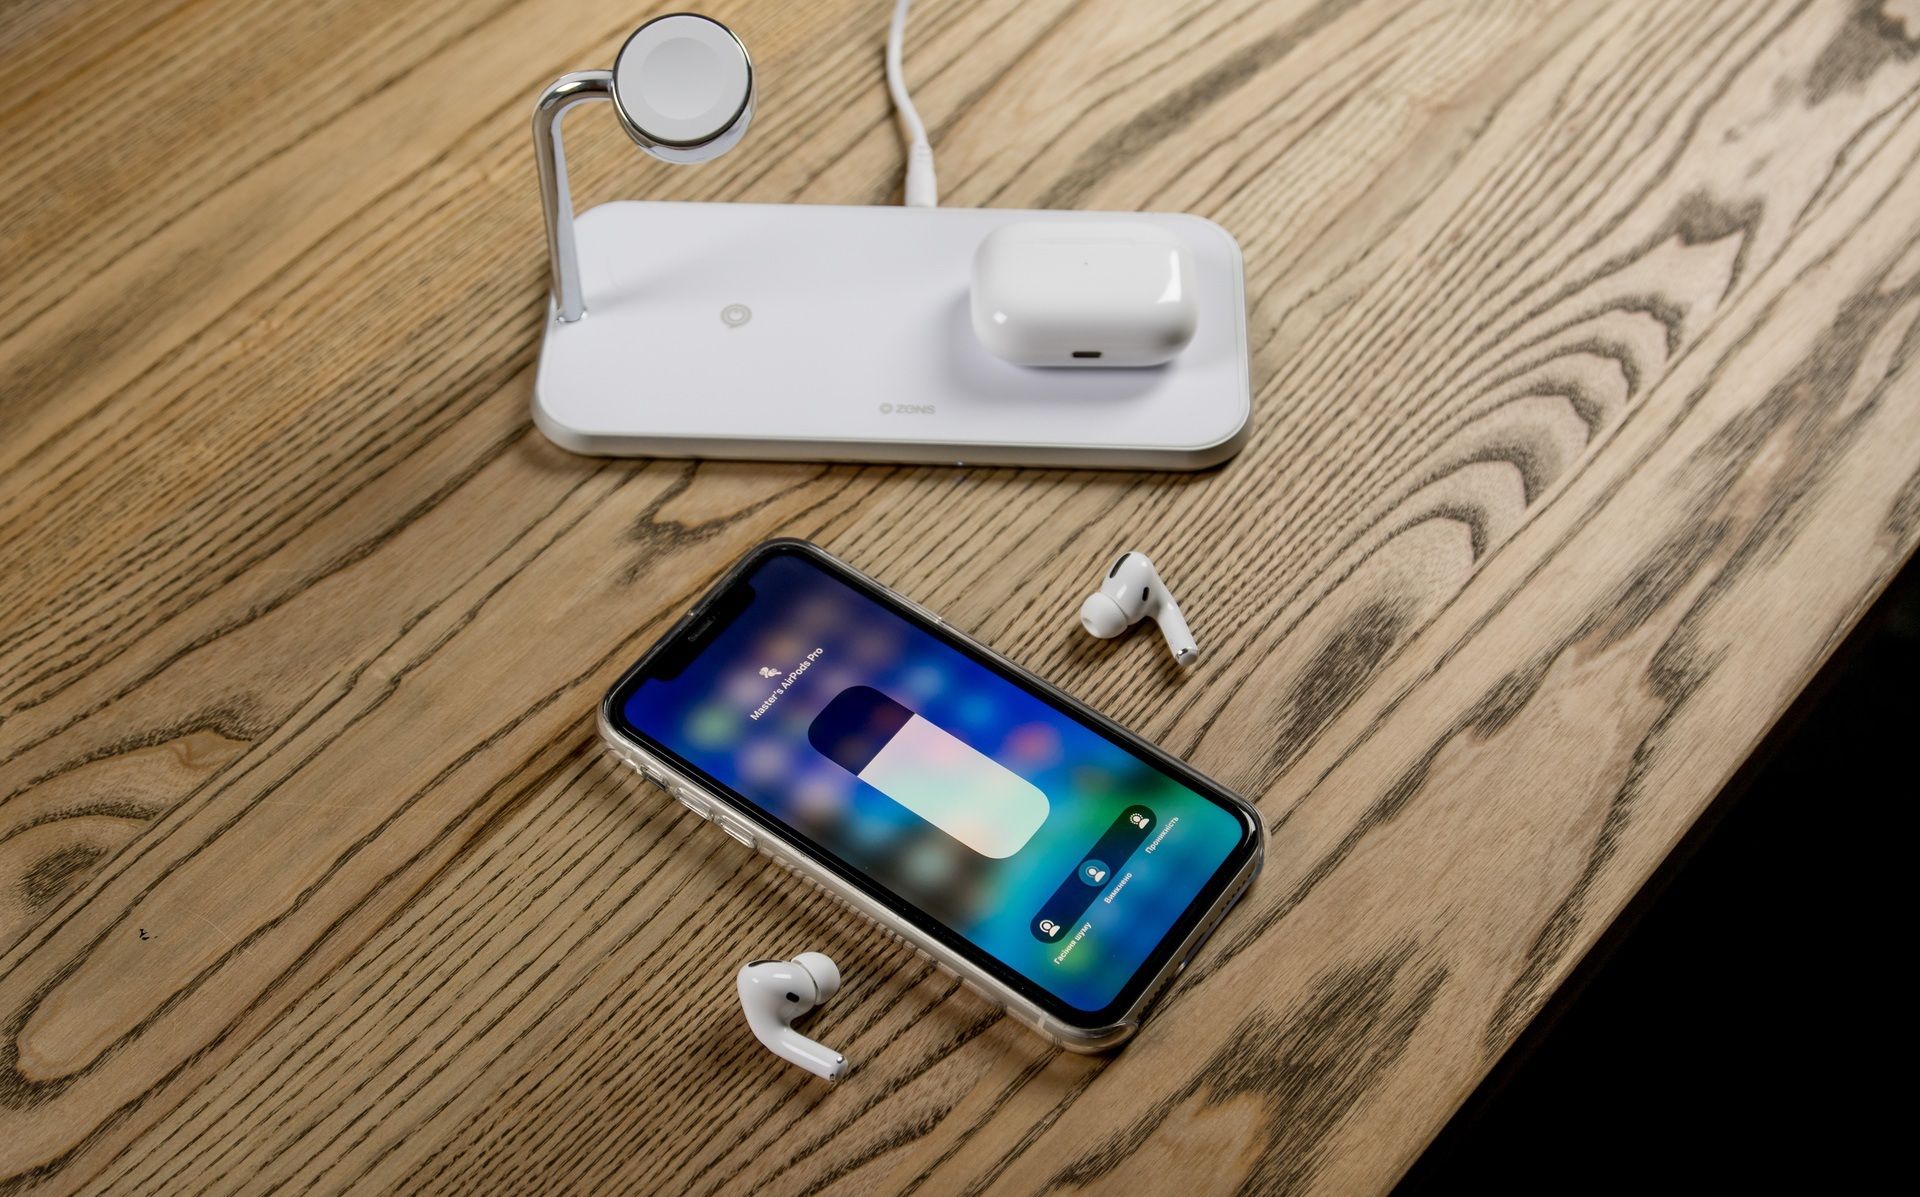 Apple AirPods Pro: A Complete Review - Airpods Pro Specs